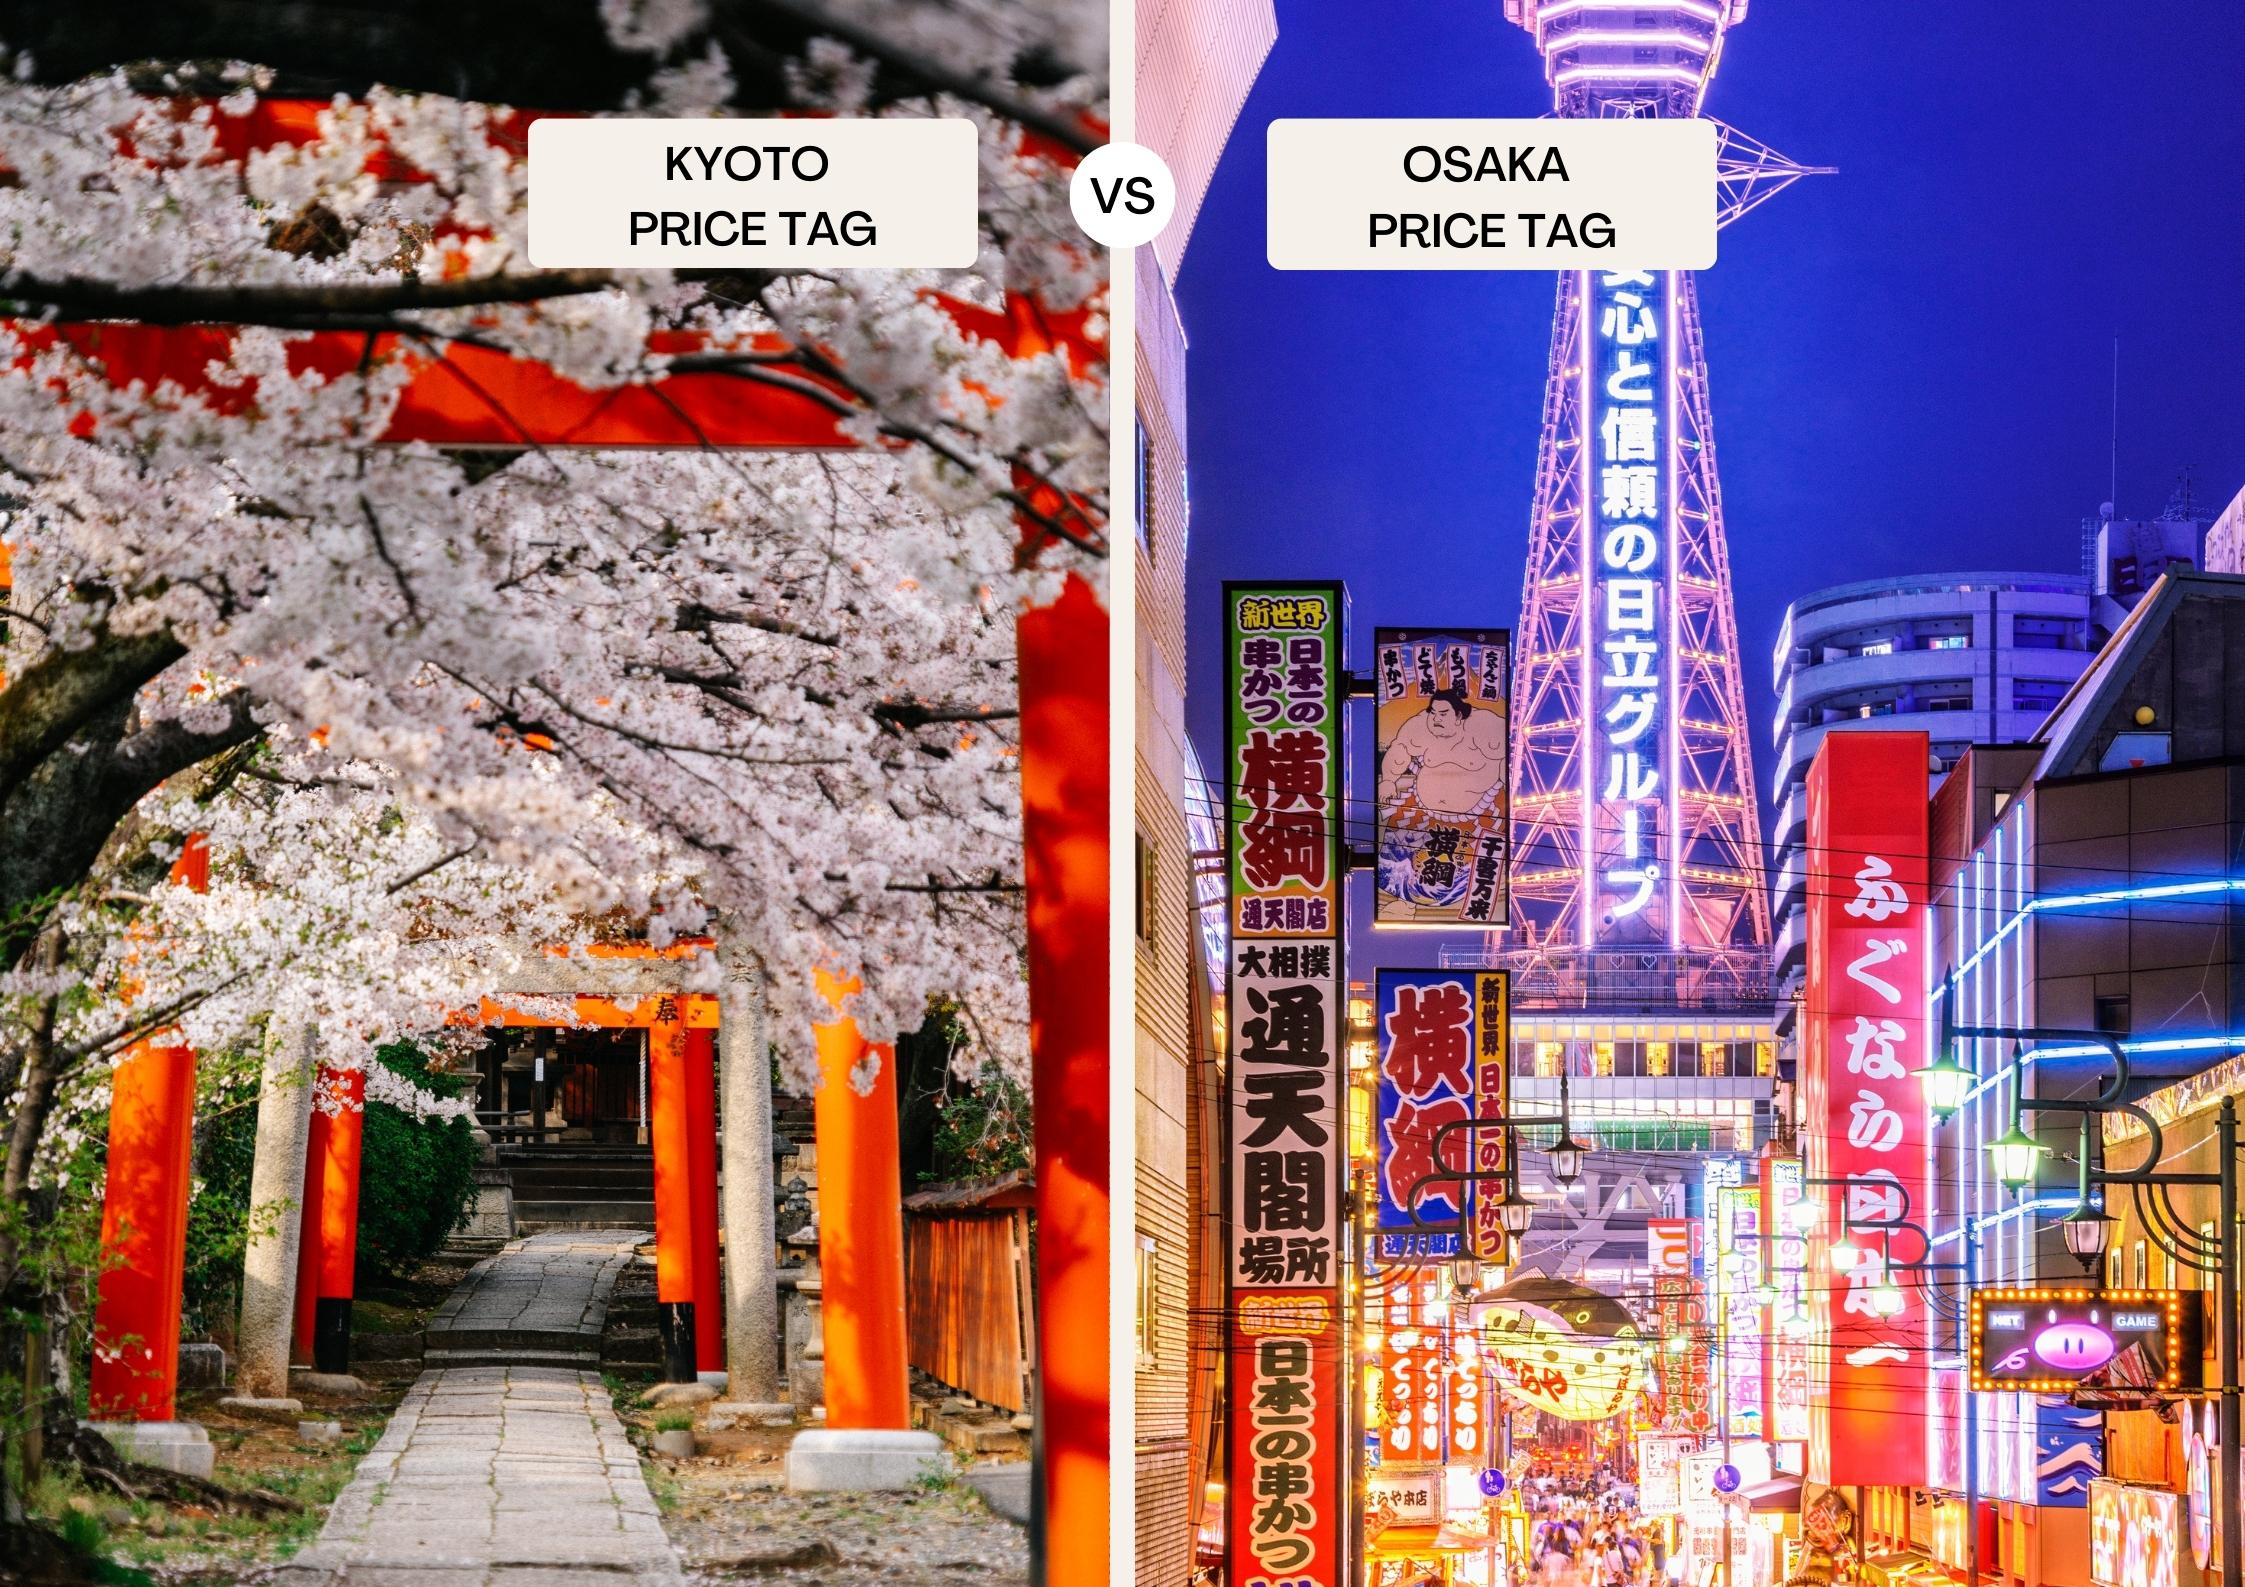 Which one is more expensive: Kyoto or Osaka